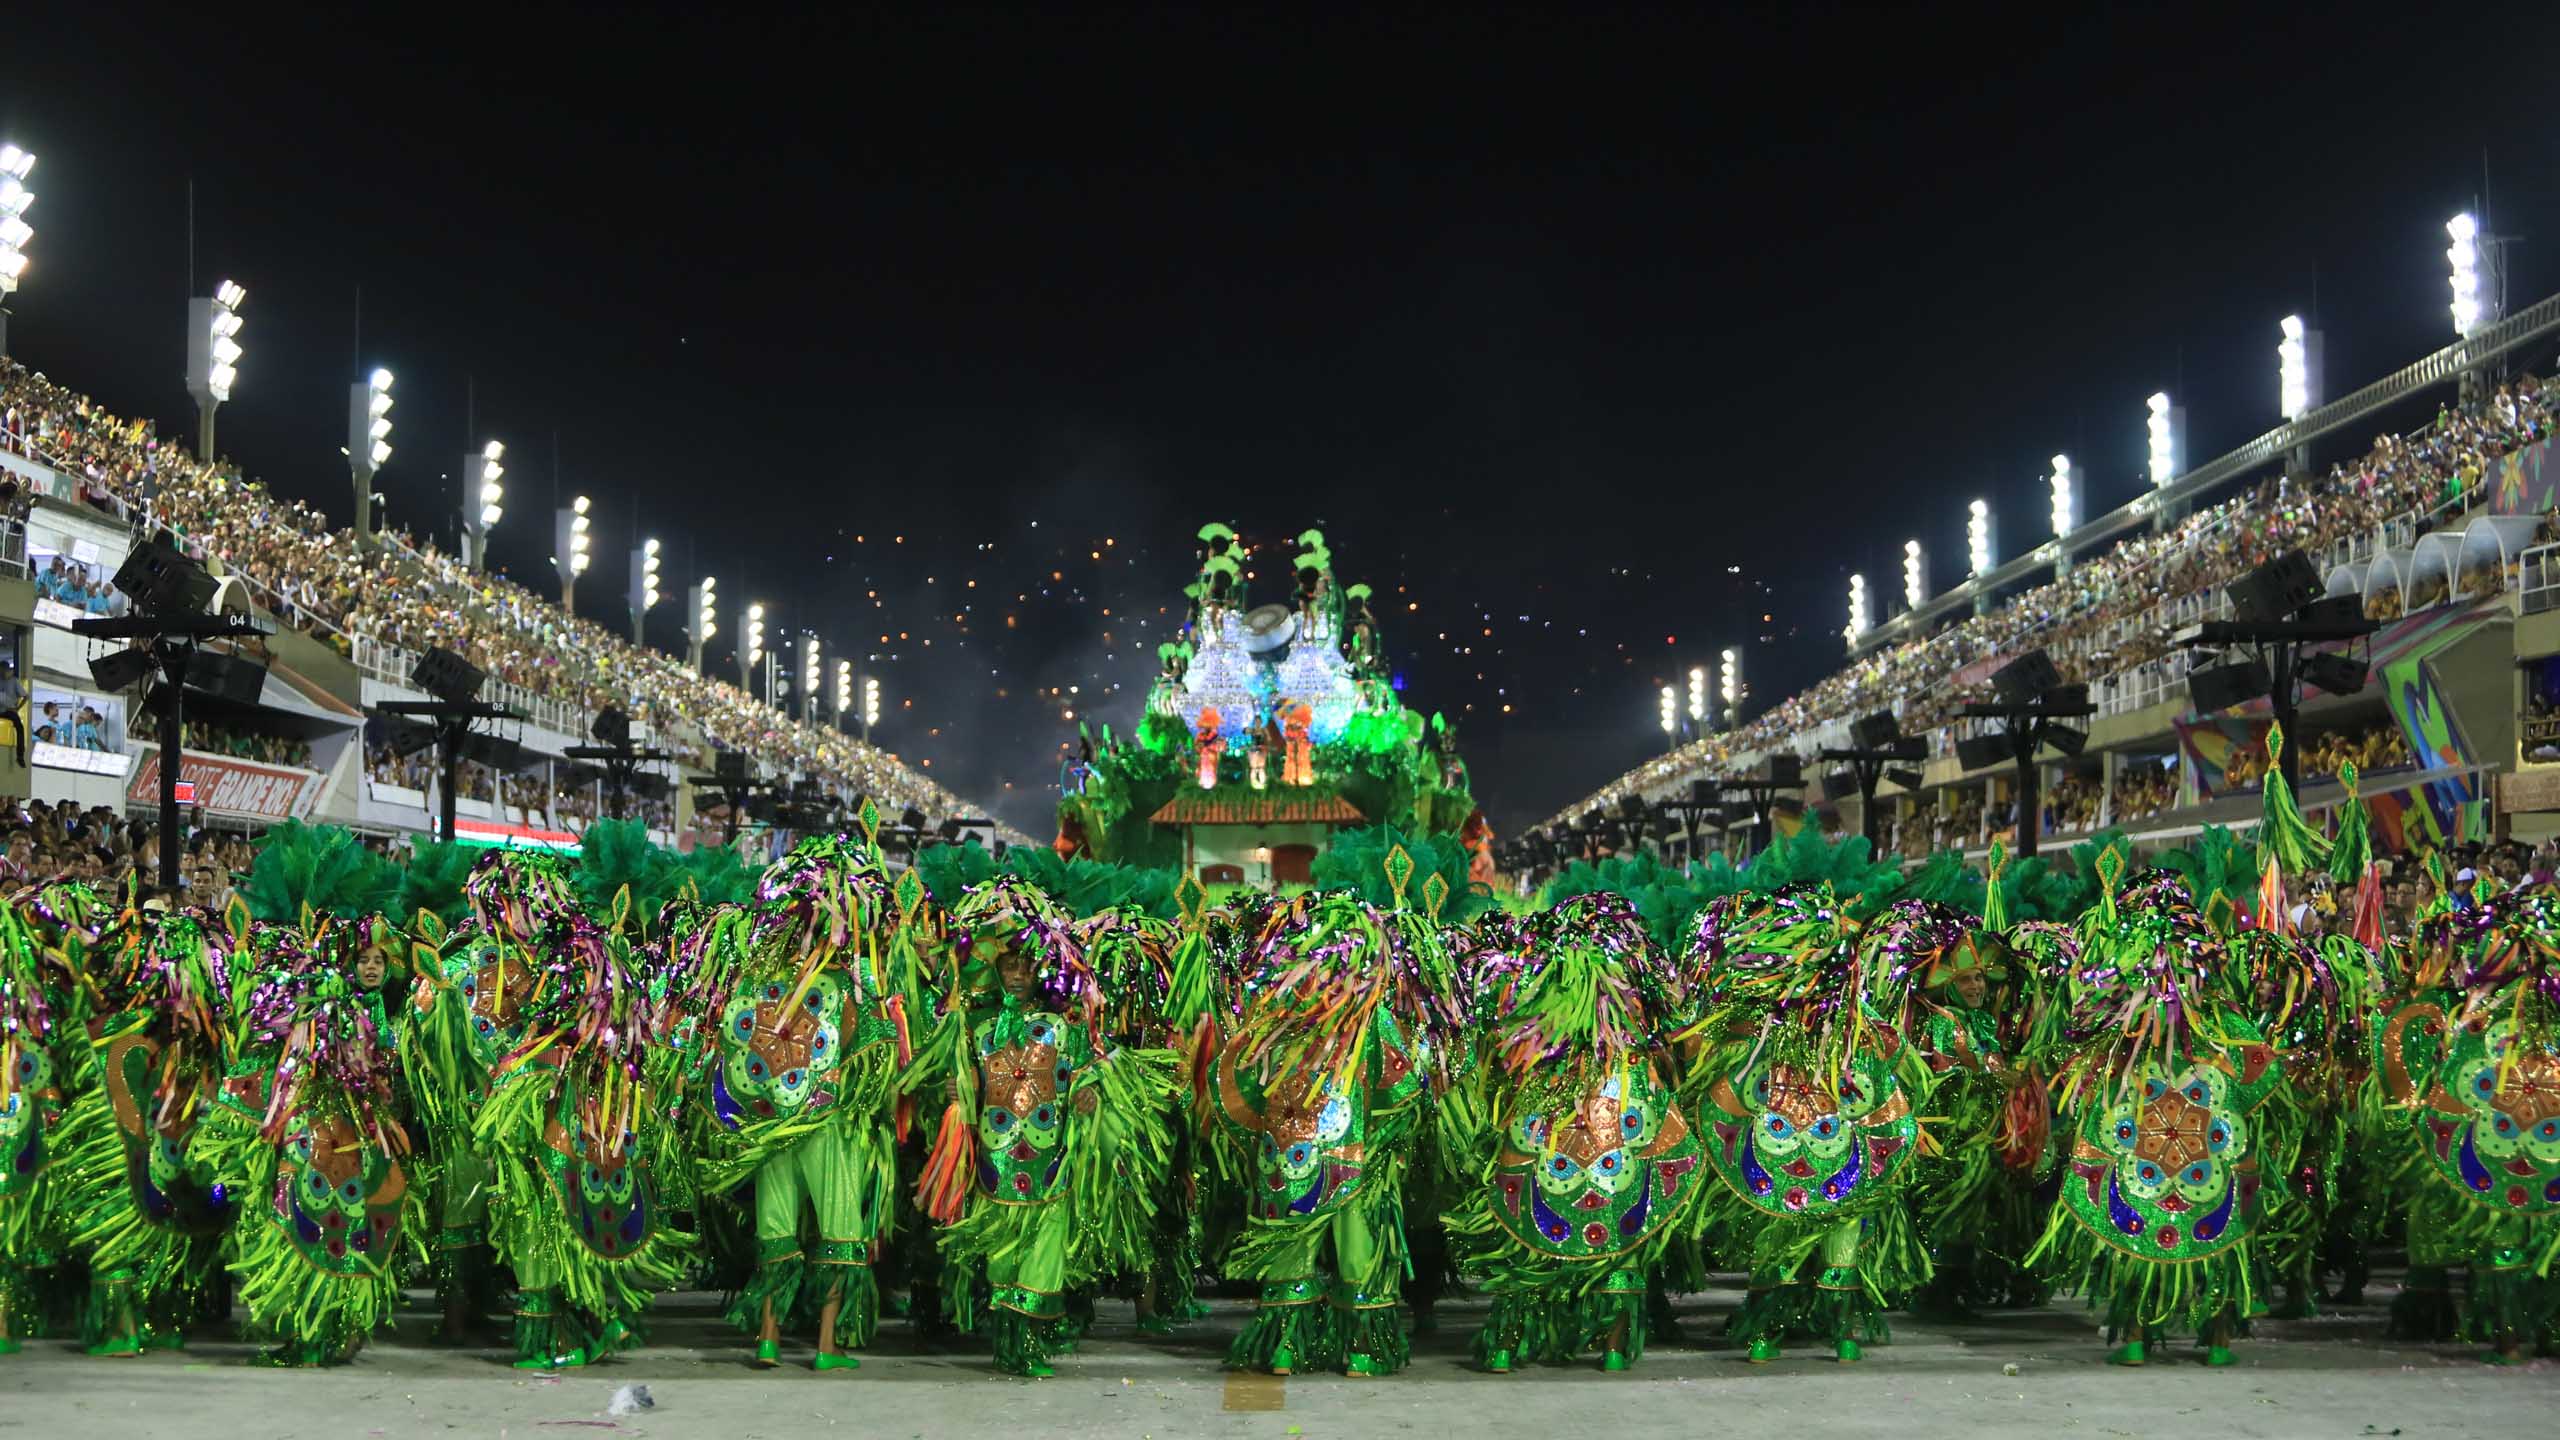 Exclusive access to Rio Carnival. Abercrombie & Kent